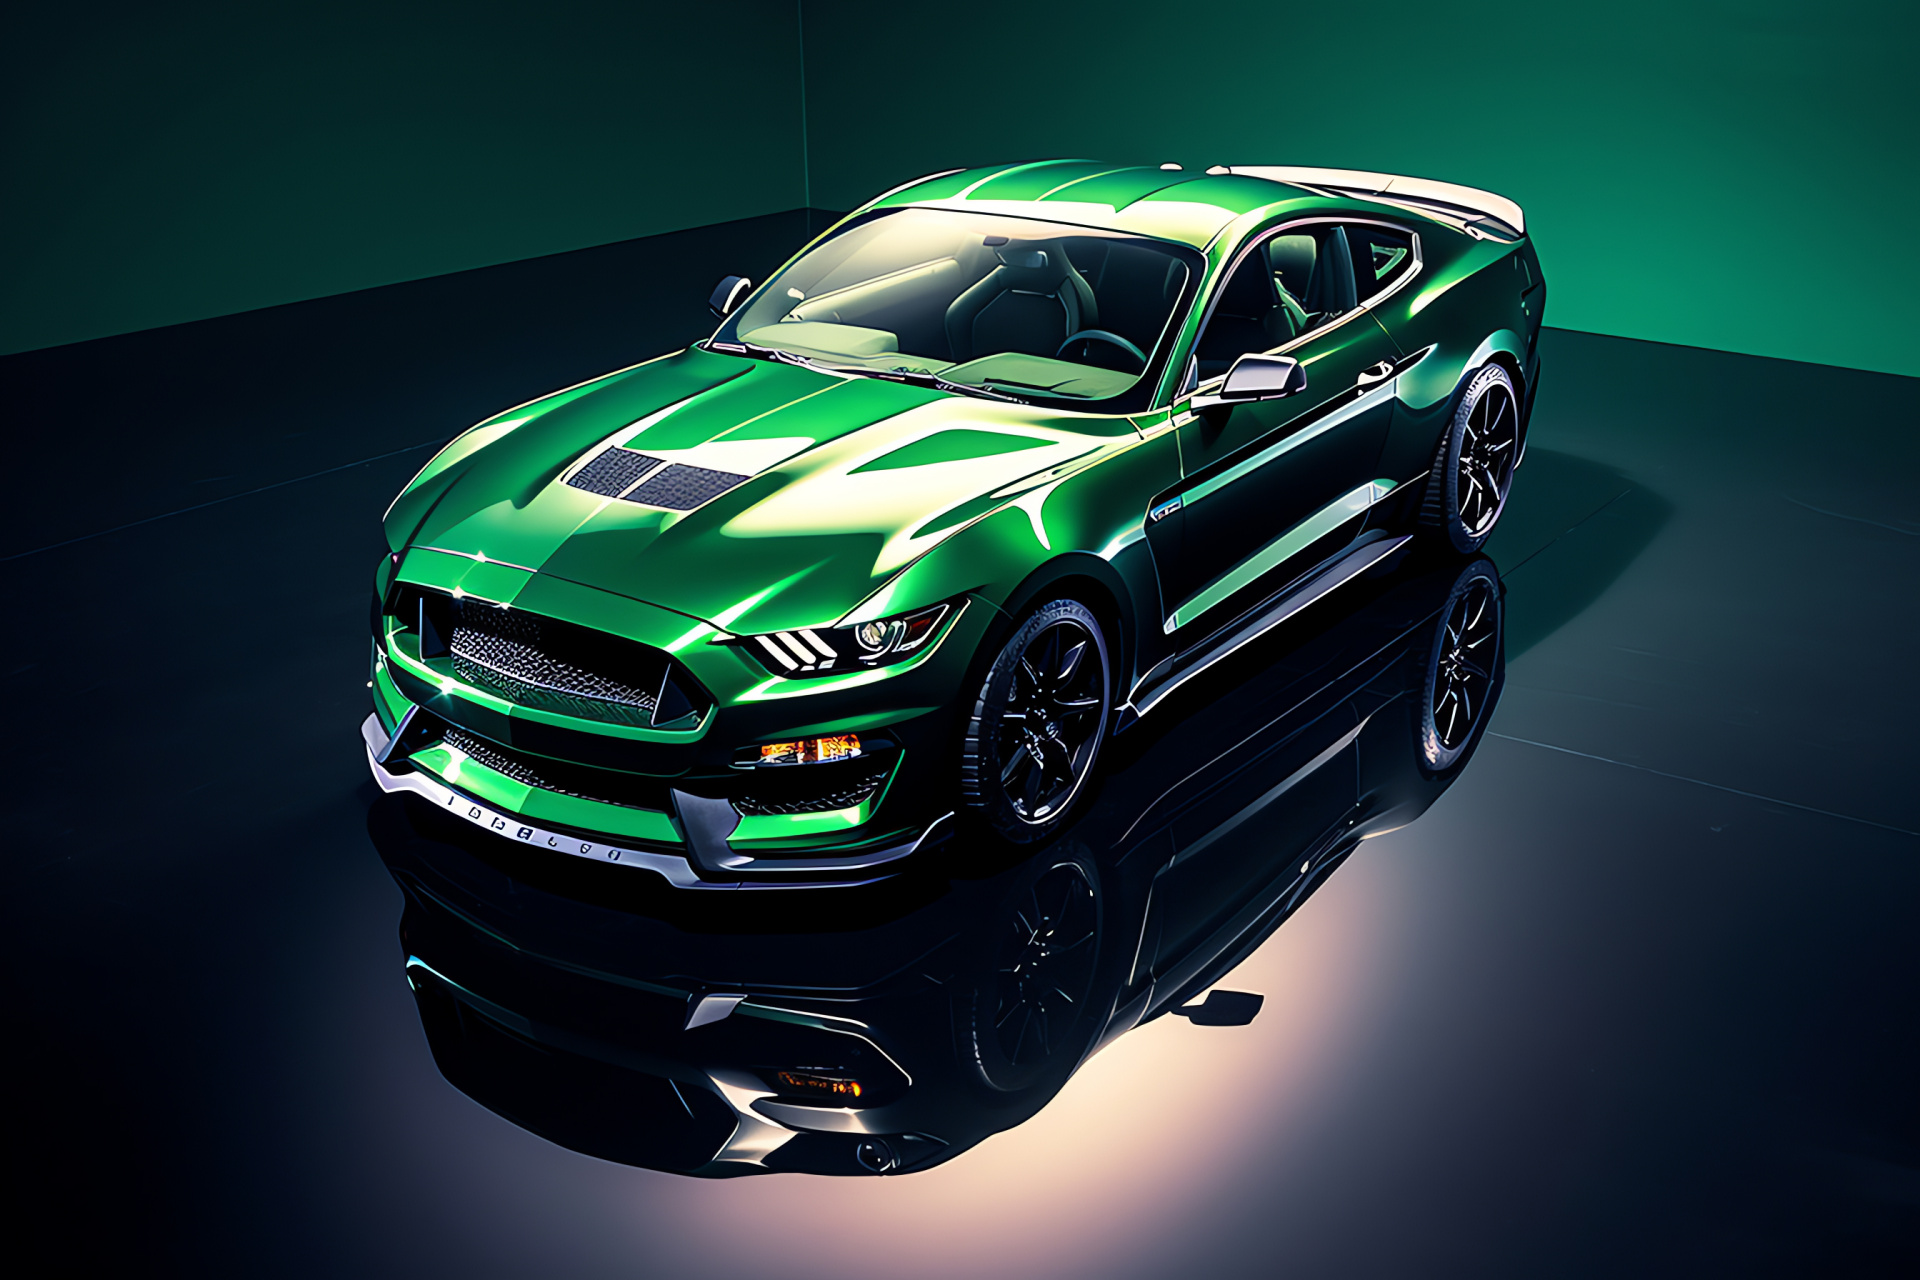 Mustang automobile, Verdant background, Elevated point of view, Performance showcase, Machine aesthetic, HD Desktop Image